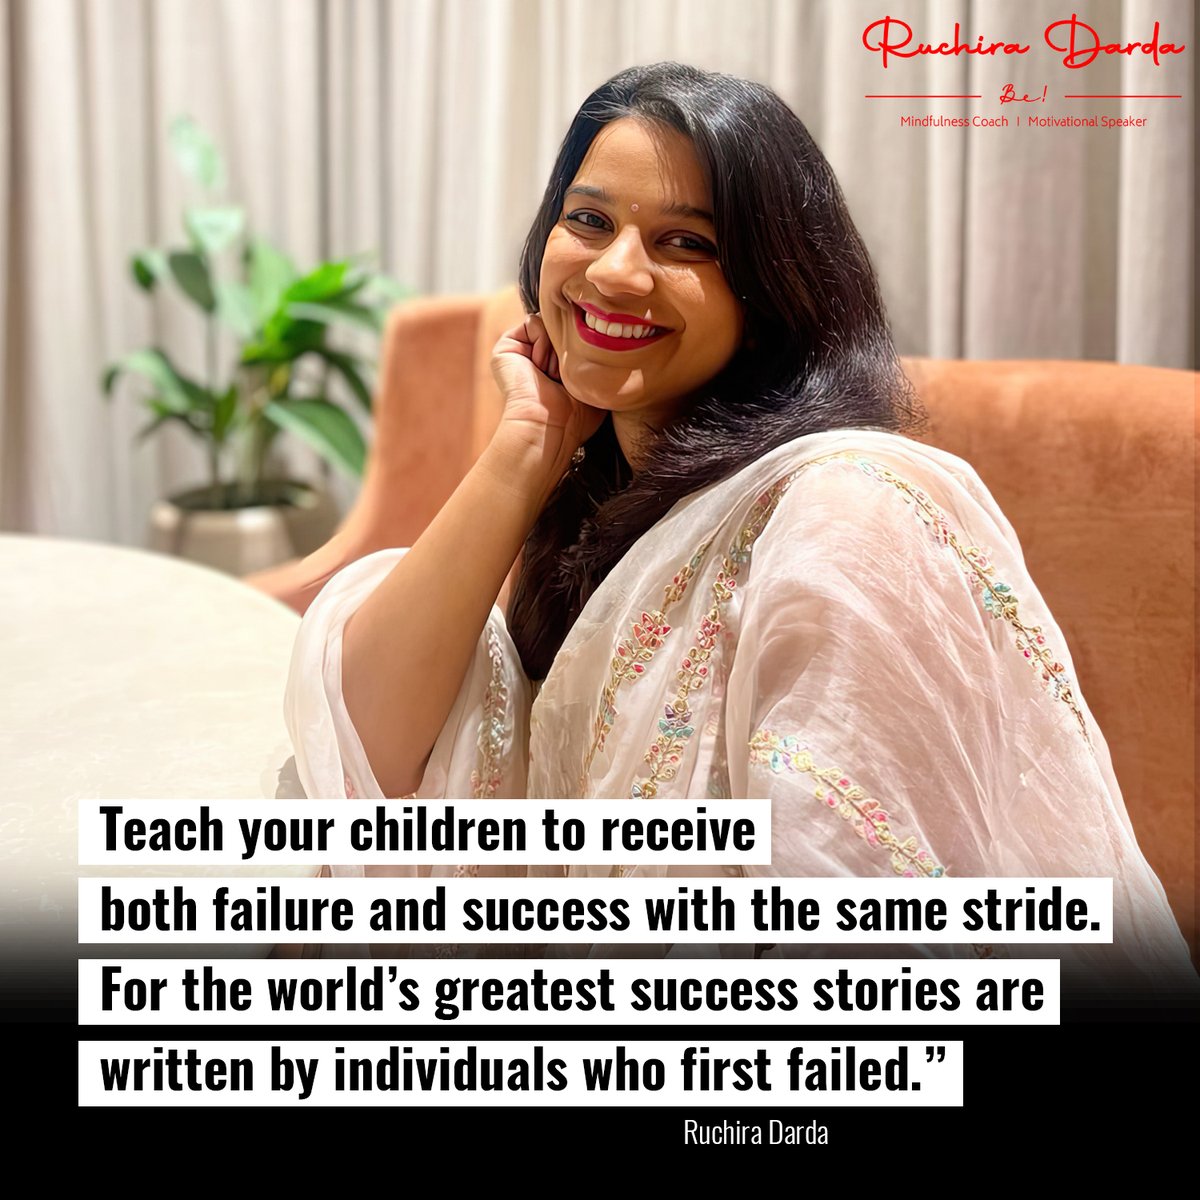 A reminder that life will happen to all of us. Embrace each wave 🌊 for nothing is constant. Your acceptance makes all the difference 🫶

#ruchiradarda #parentingtips #parentinghacks #parentinglife #parenting101 #parentinggoals #parentingteens #parentingskills #parentingblogger